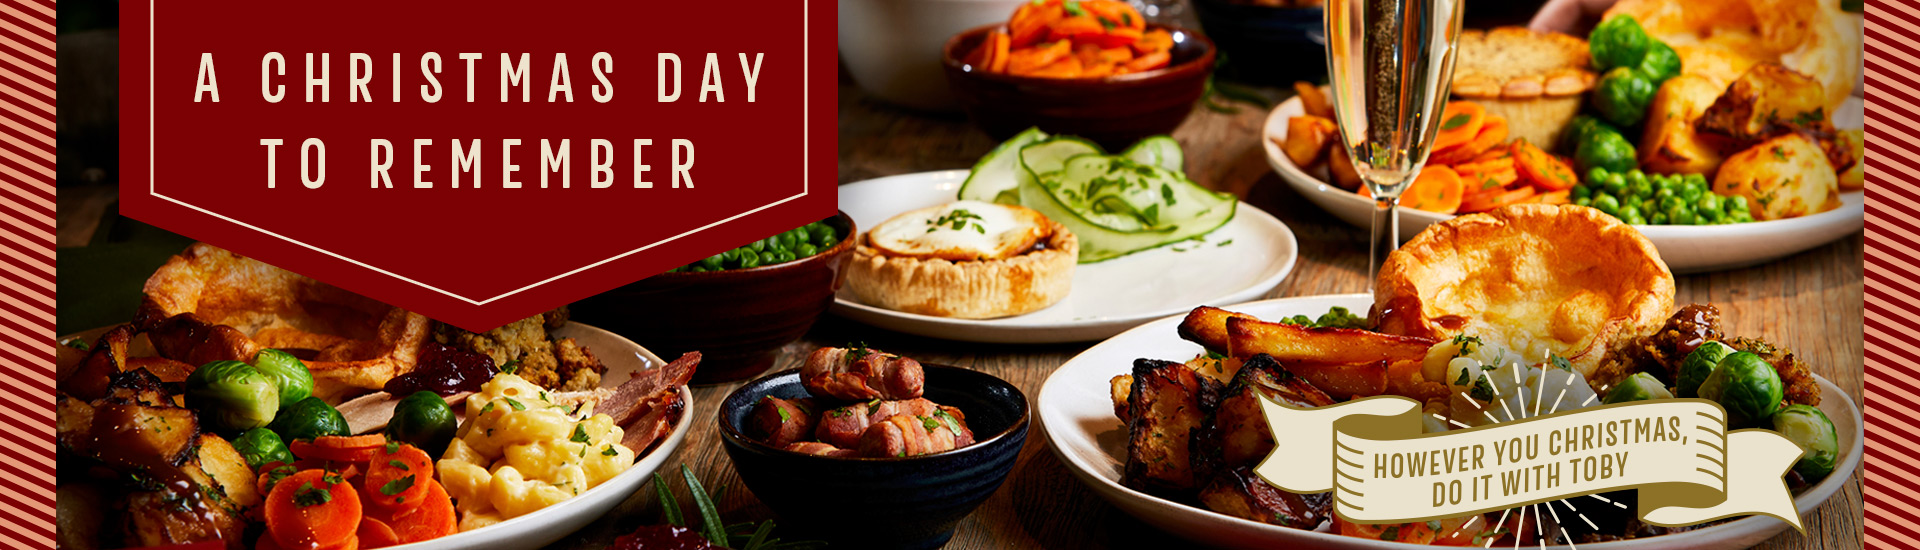 Christmas Day menu at Toby Carvery Trentham Village